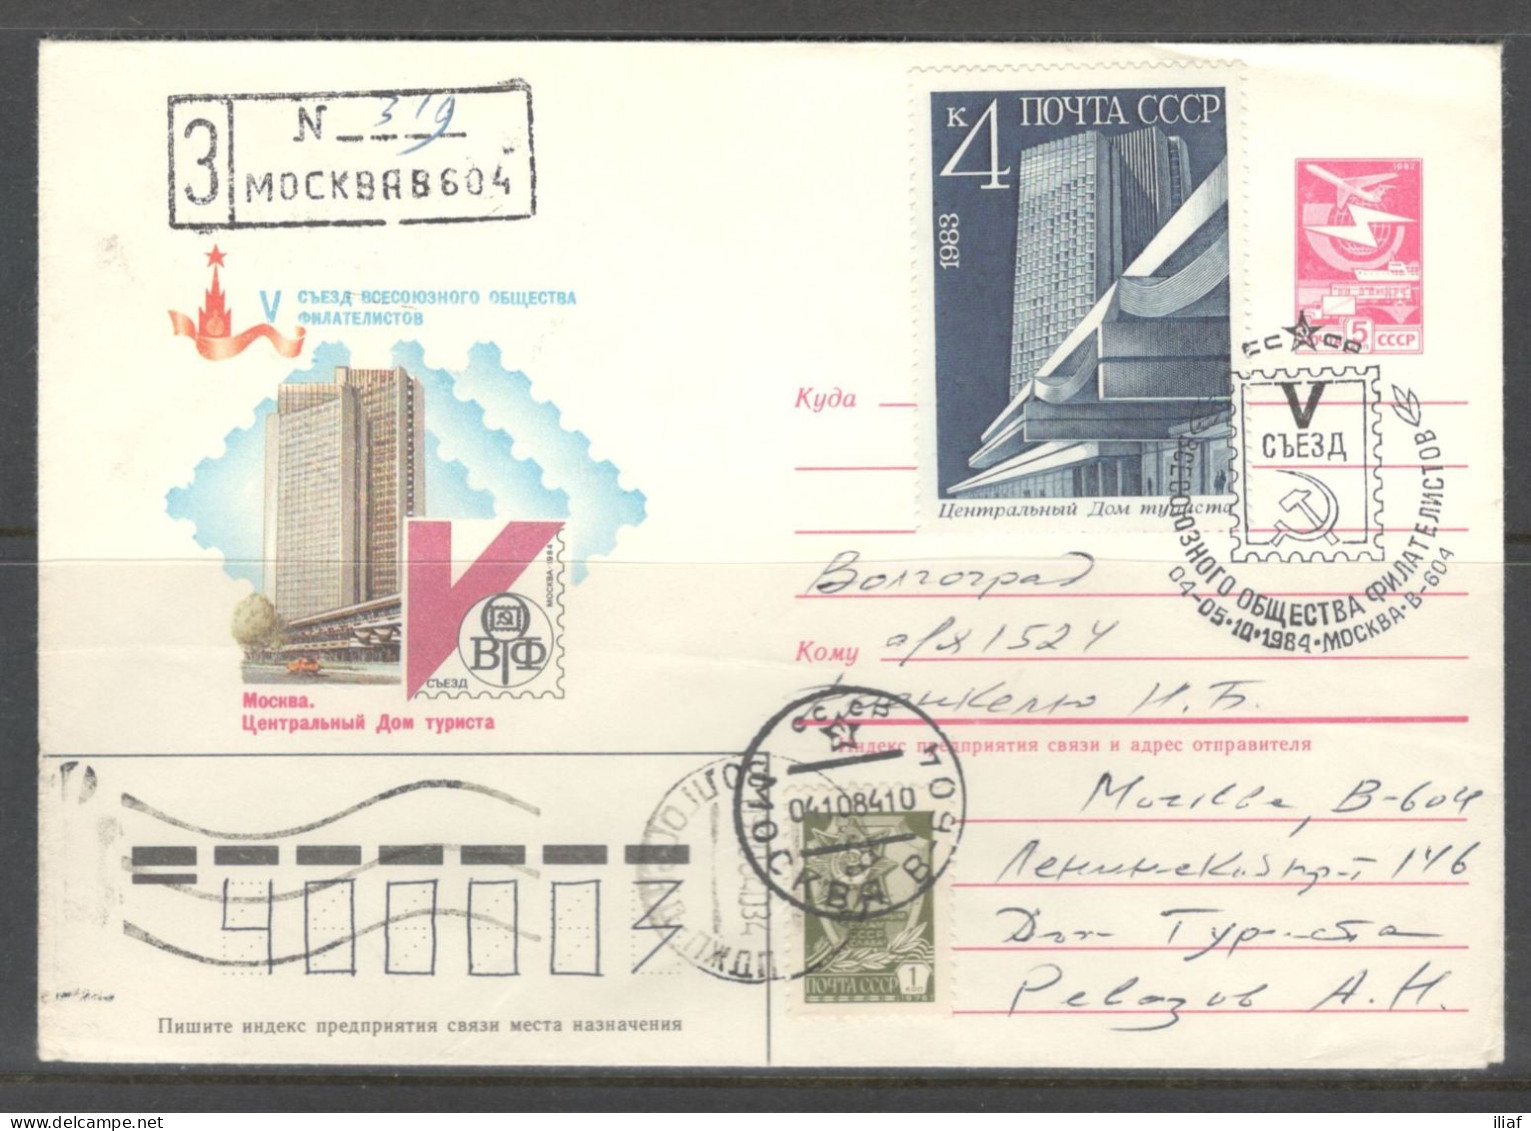 RUSSIA & USSR. 5th Congress Of The All-Union Society Of Philatelists. Illustrated Envelope With Special Cancellation - Stamp's Day